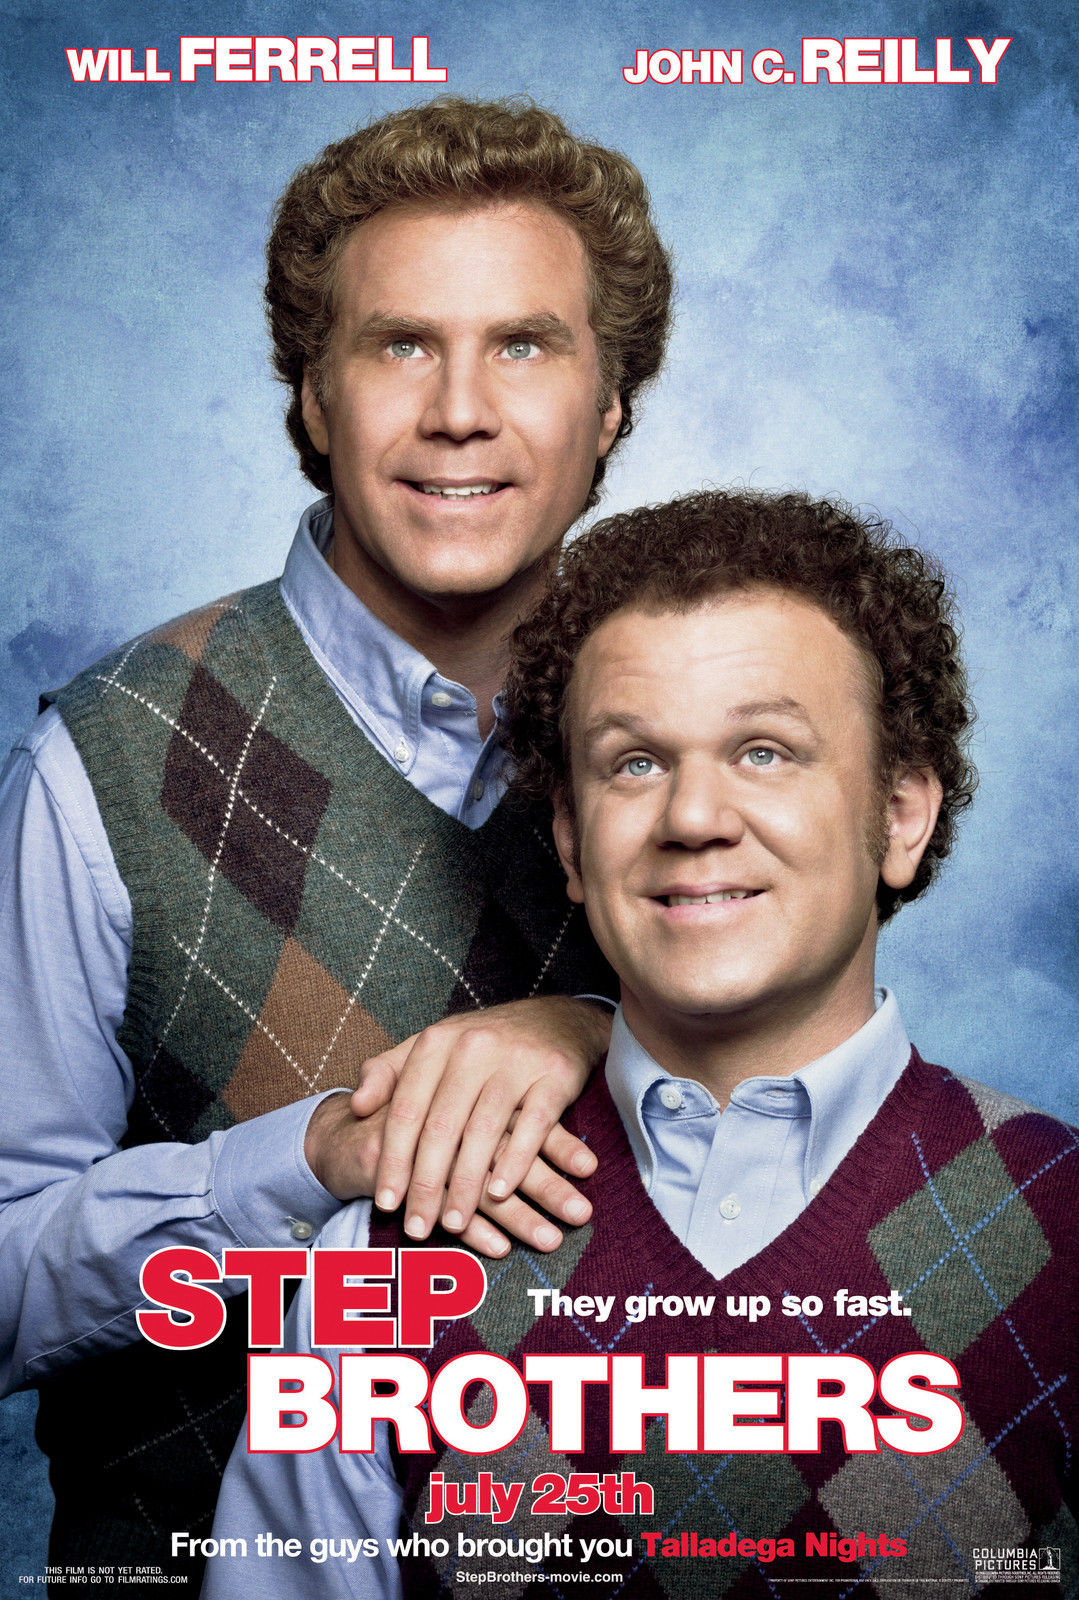 Movies Like The Hangover - Step Brothers